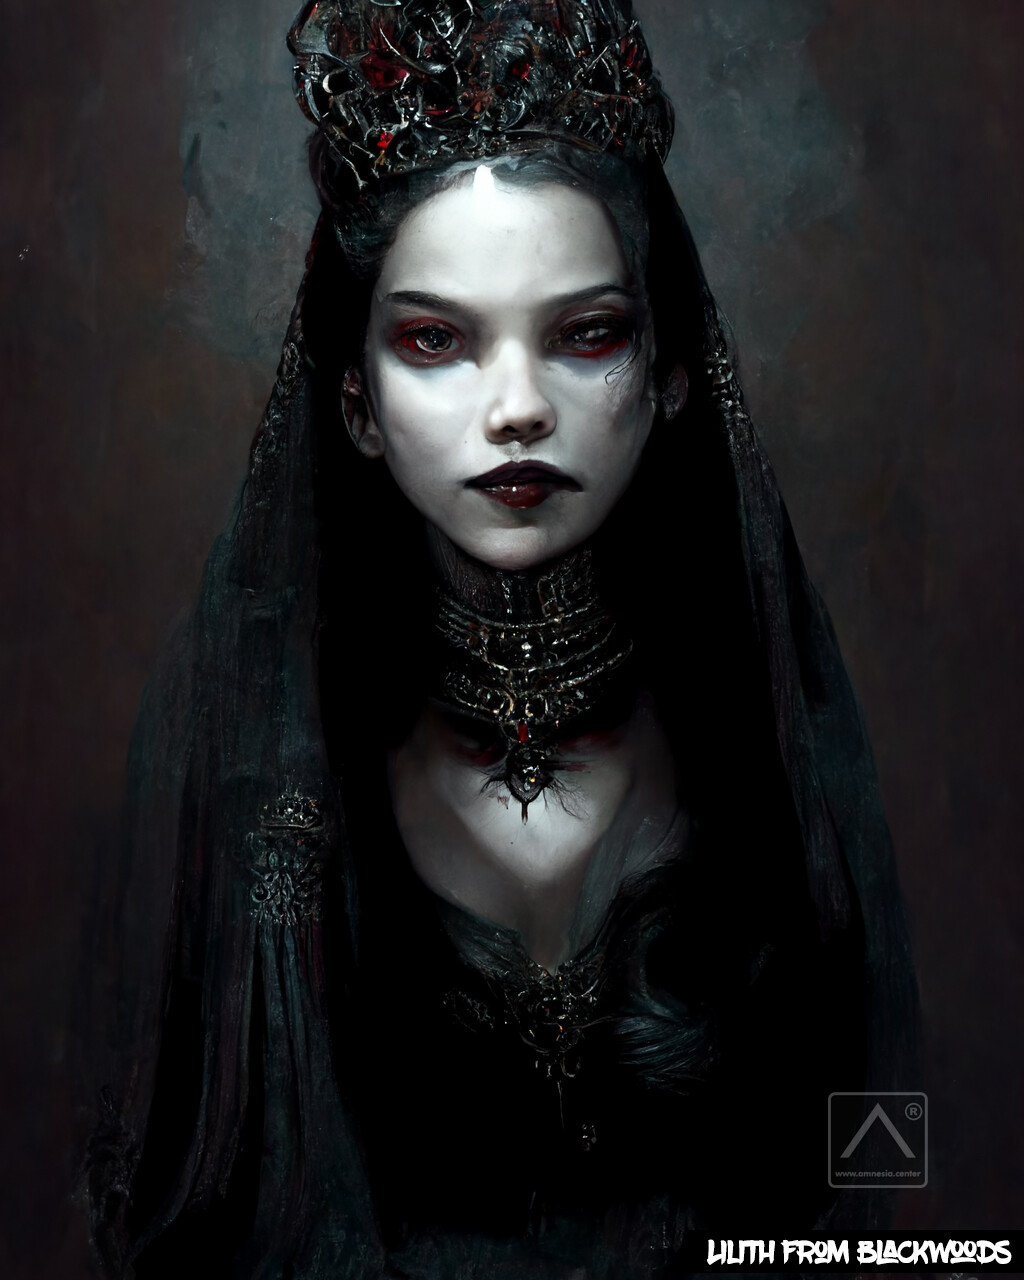 ArtStation - Lilith From BlackWoods